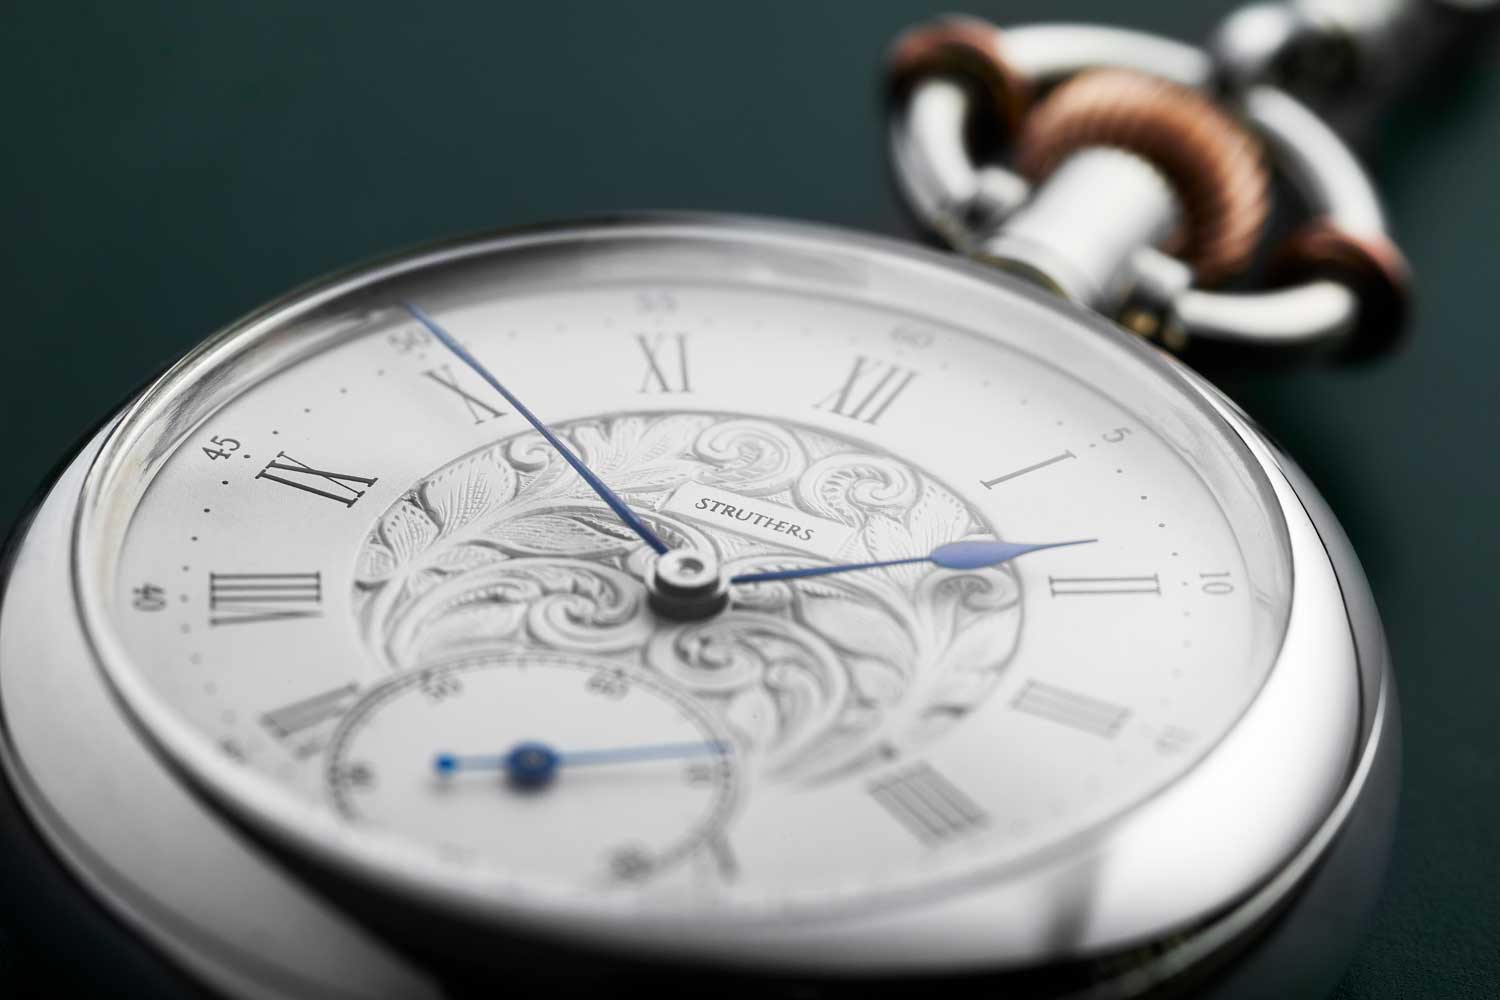 The Carter by Struthers Watchmakers